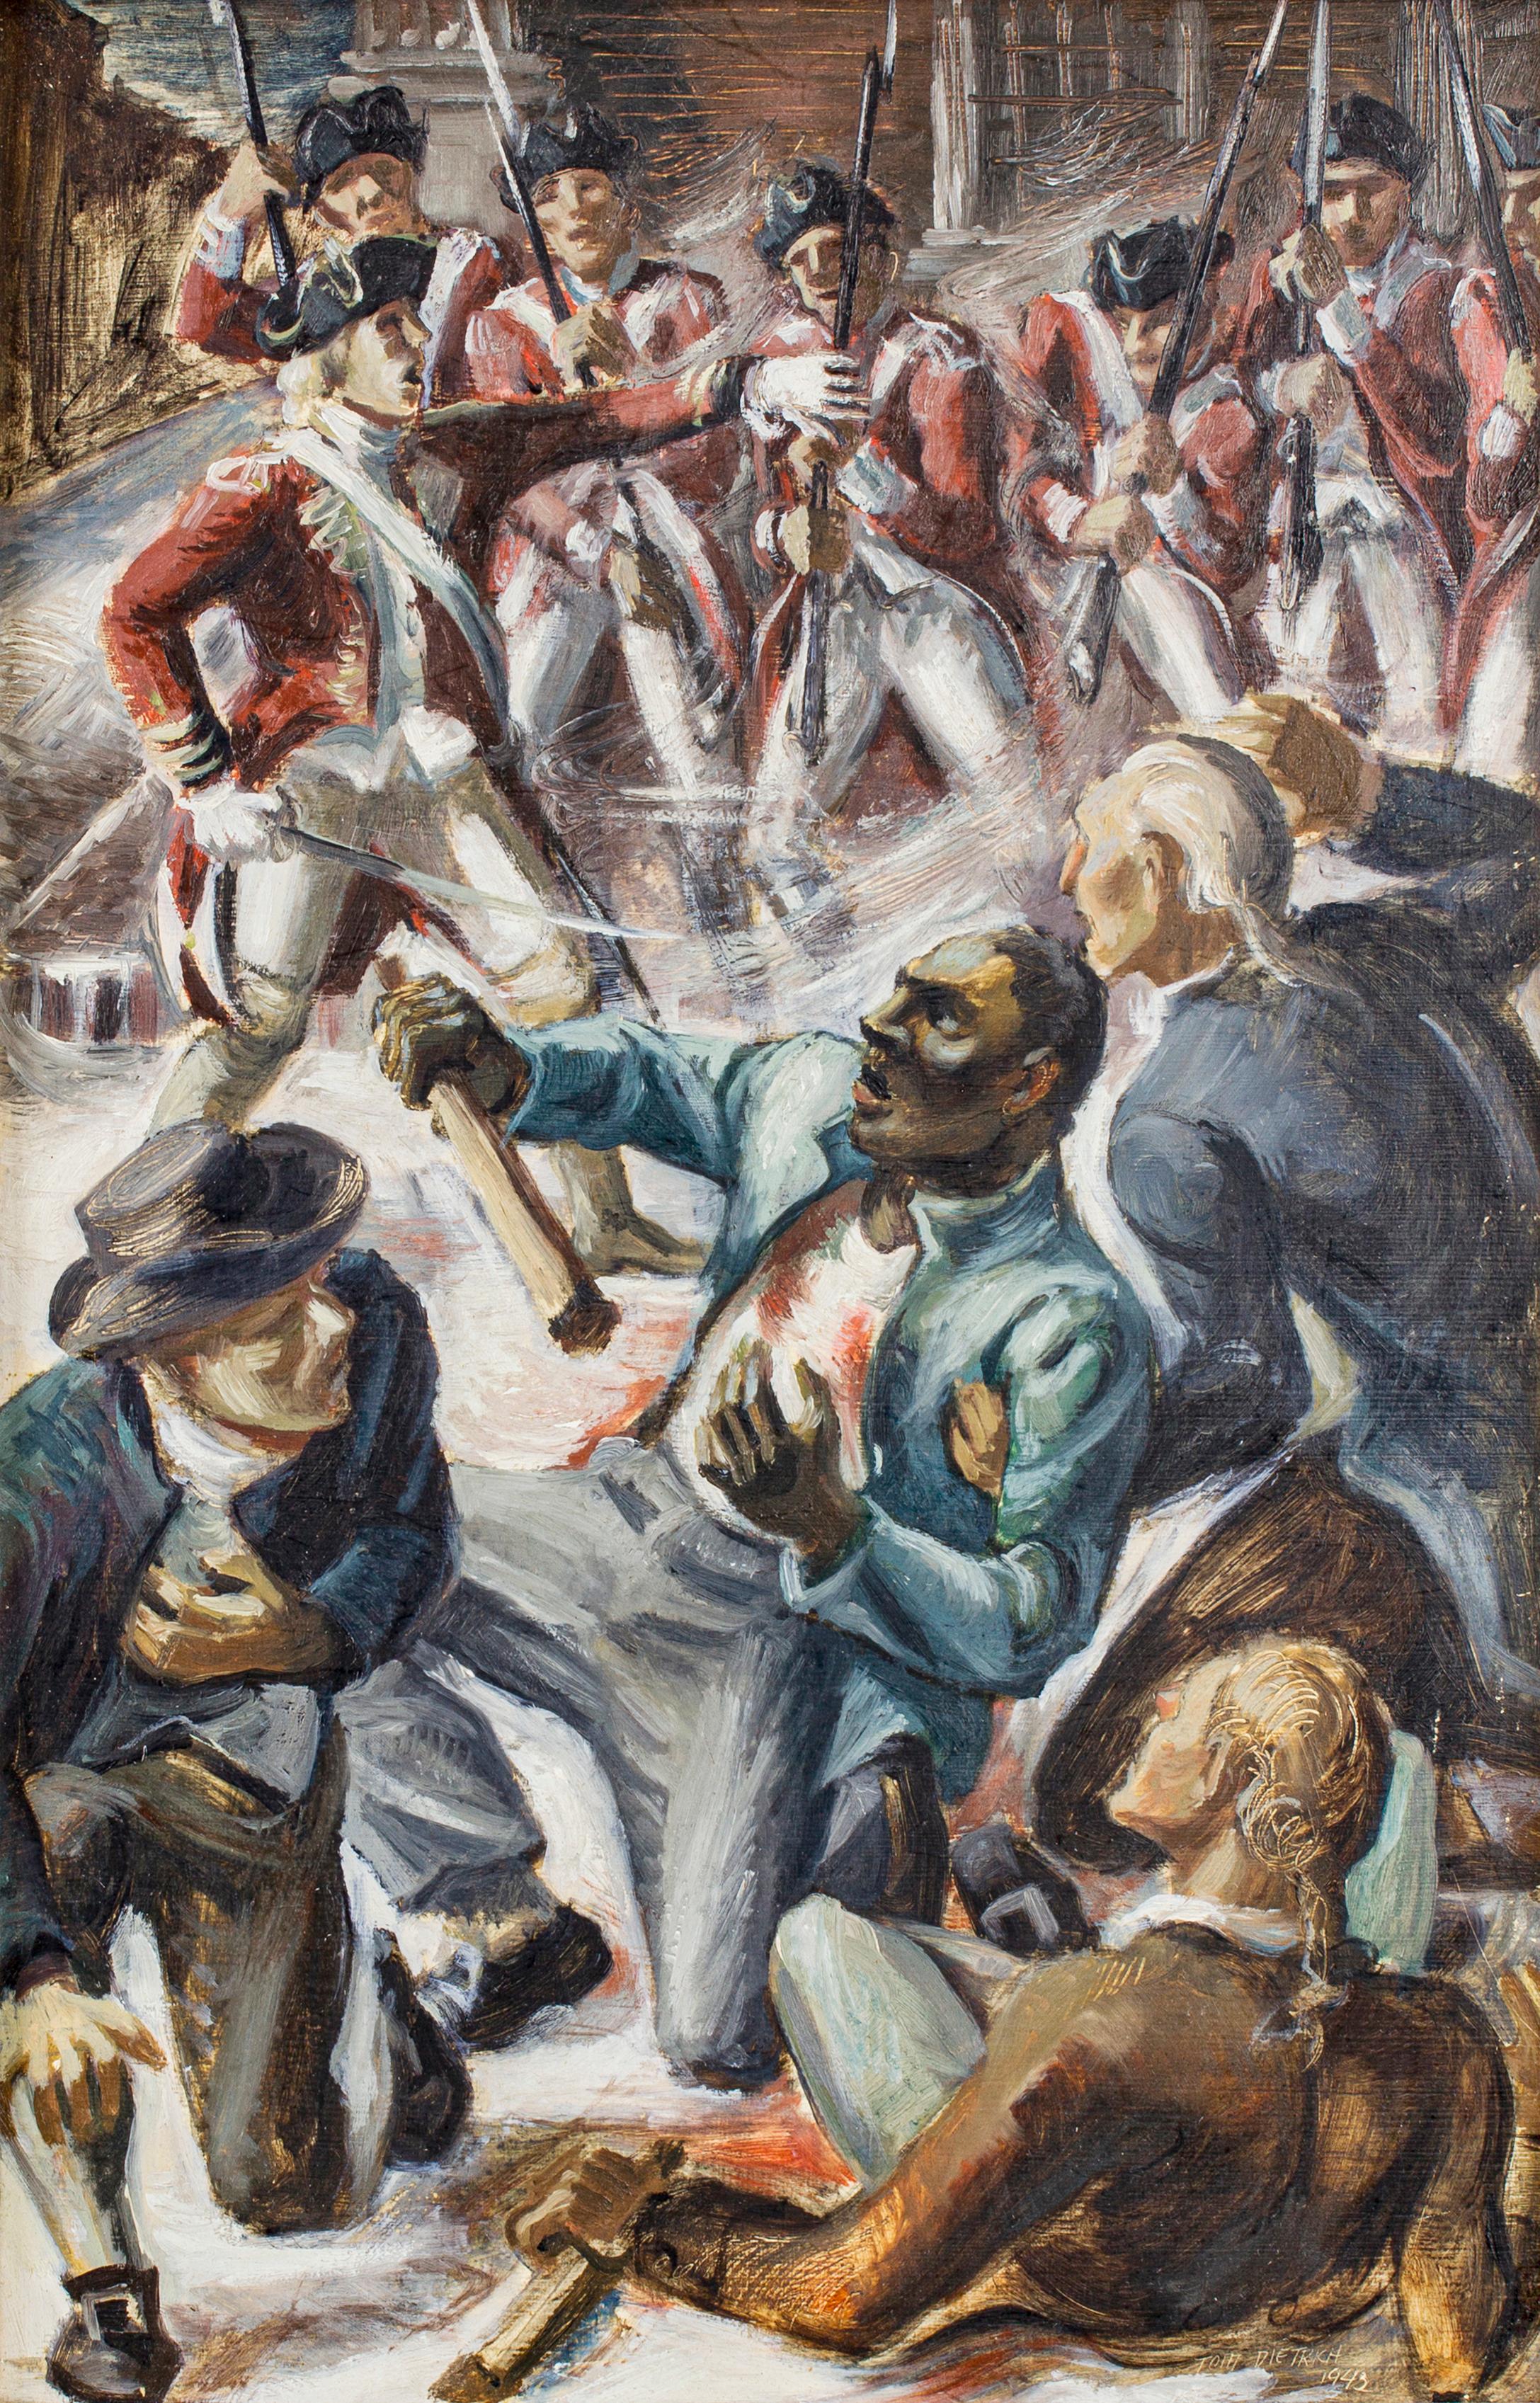 Thomas M. Dietrich 1912-1998
The Death of Crispus Attucks, 1943
Tempera and oil on board
21 x 15 inches
Signed and dated: Tom Dietrich 1943

Thomas M. Dietrich was an artist in residence at Lawrence College for 30 years and painted in the American